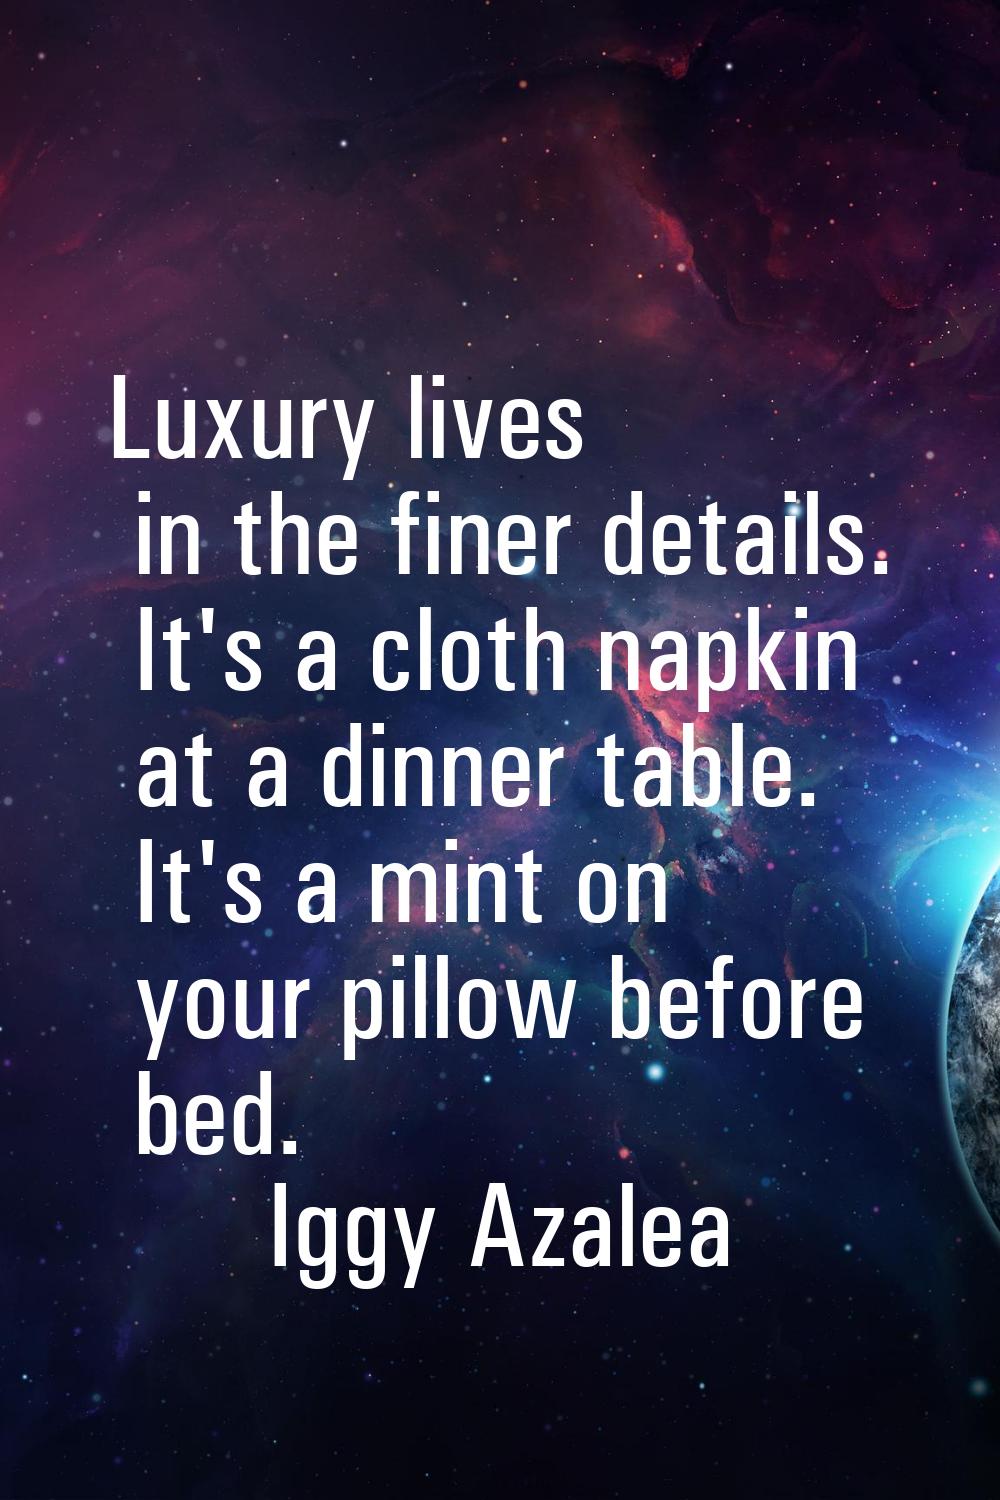 Luxury lives in the finer details. It's a cloth napkin at a dinner table. It's a mint on your pillo